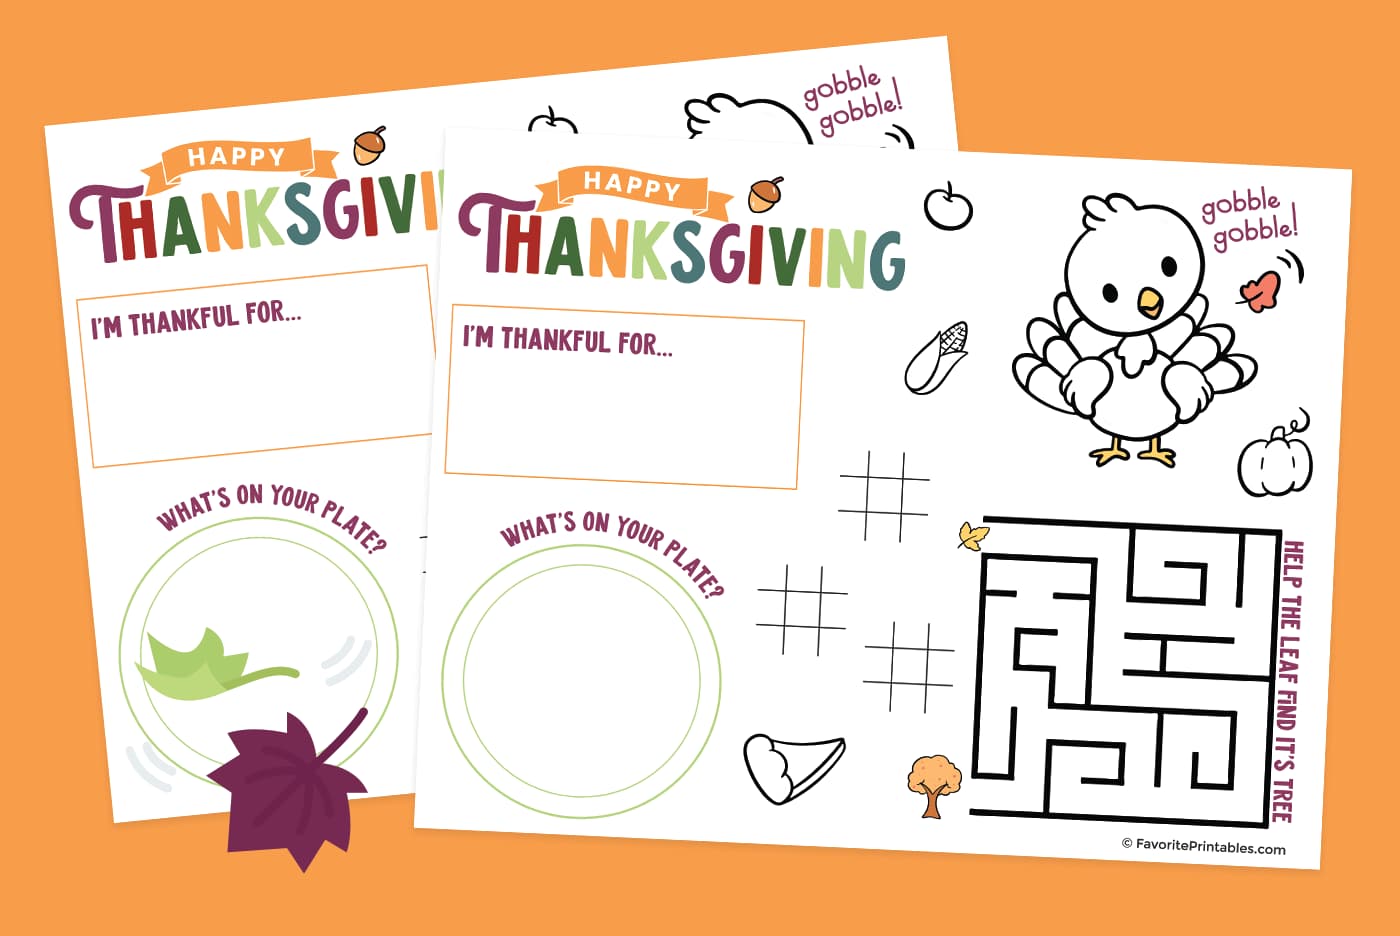 Printable Thanksgiving activity sheet preview.